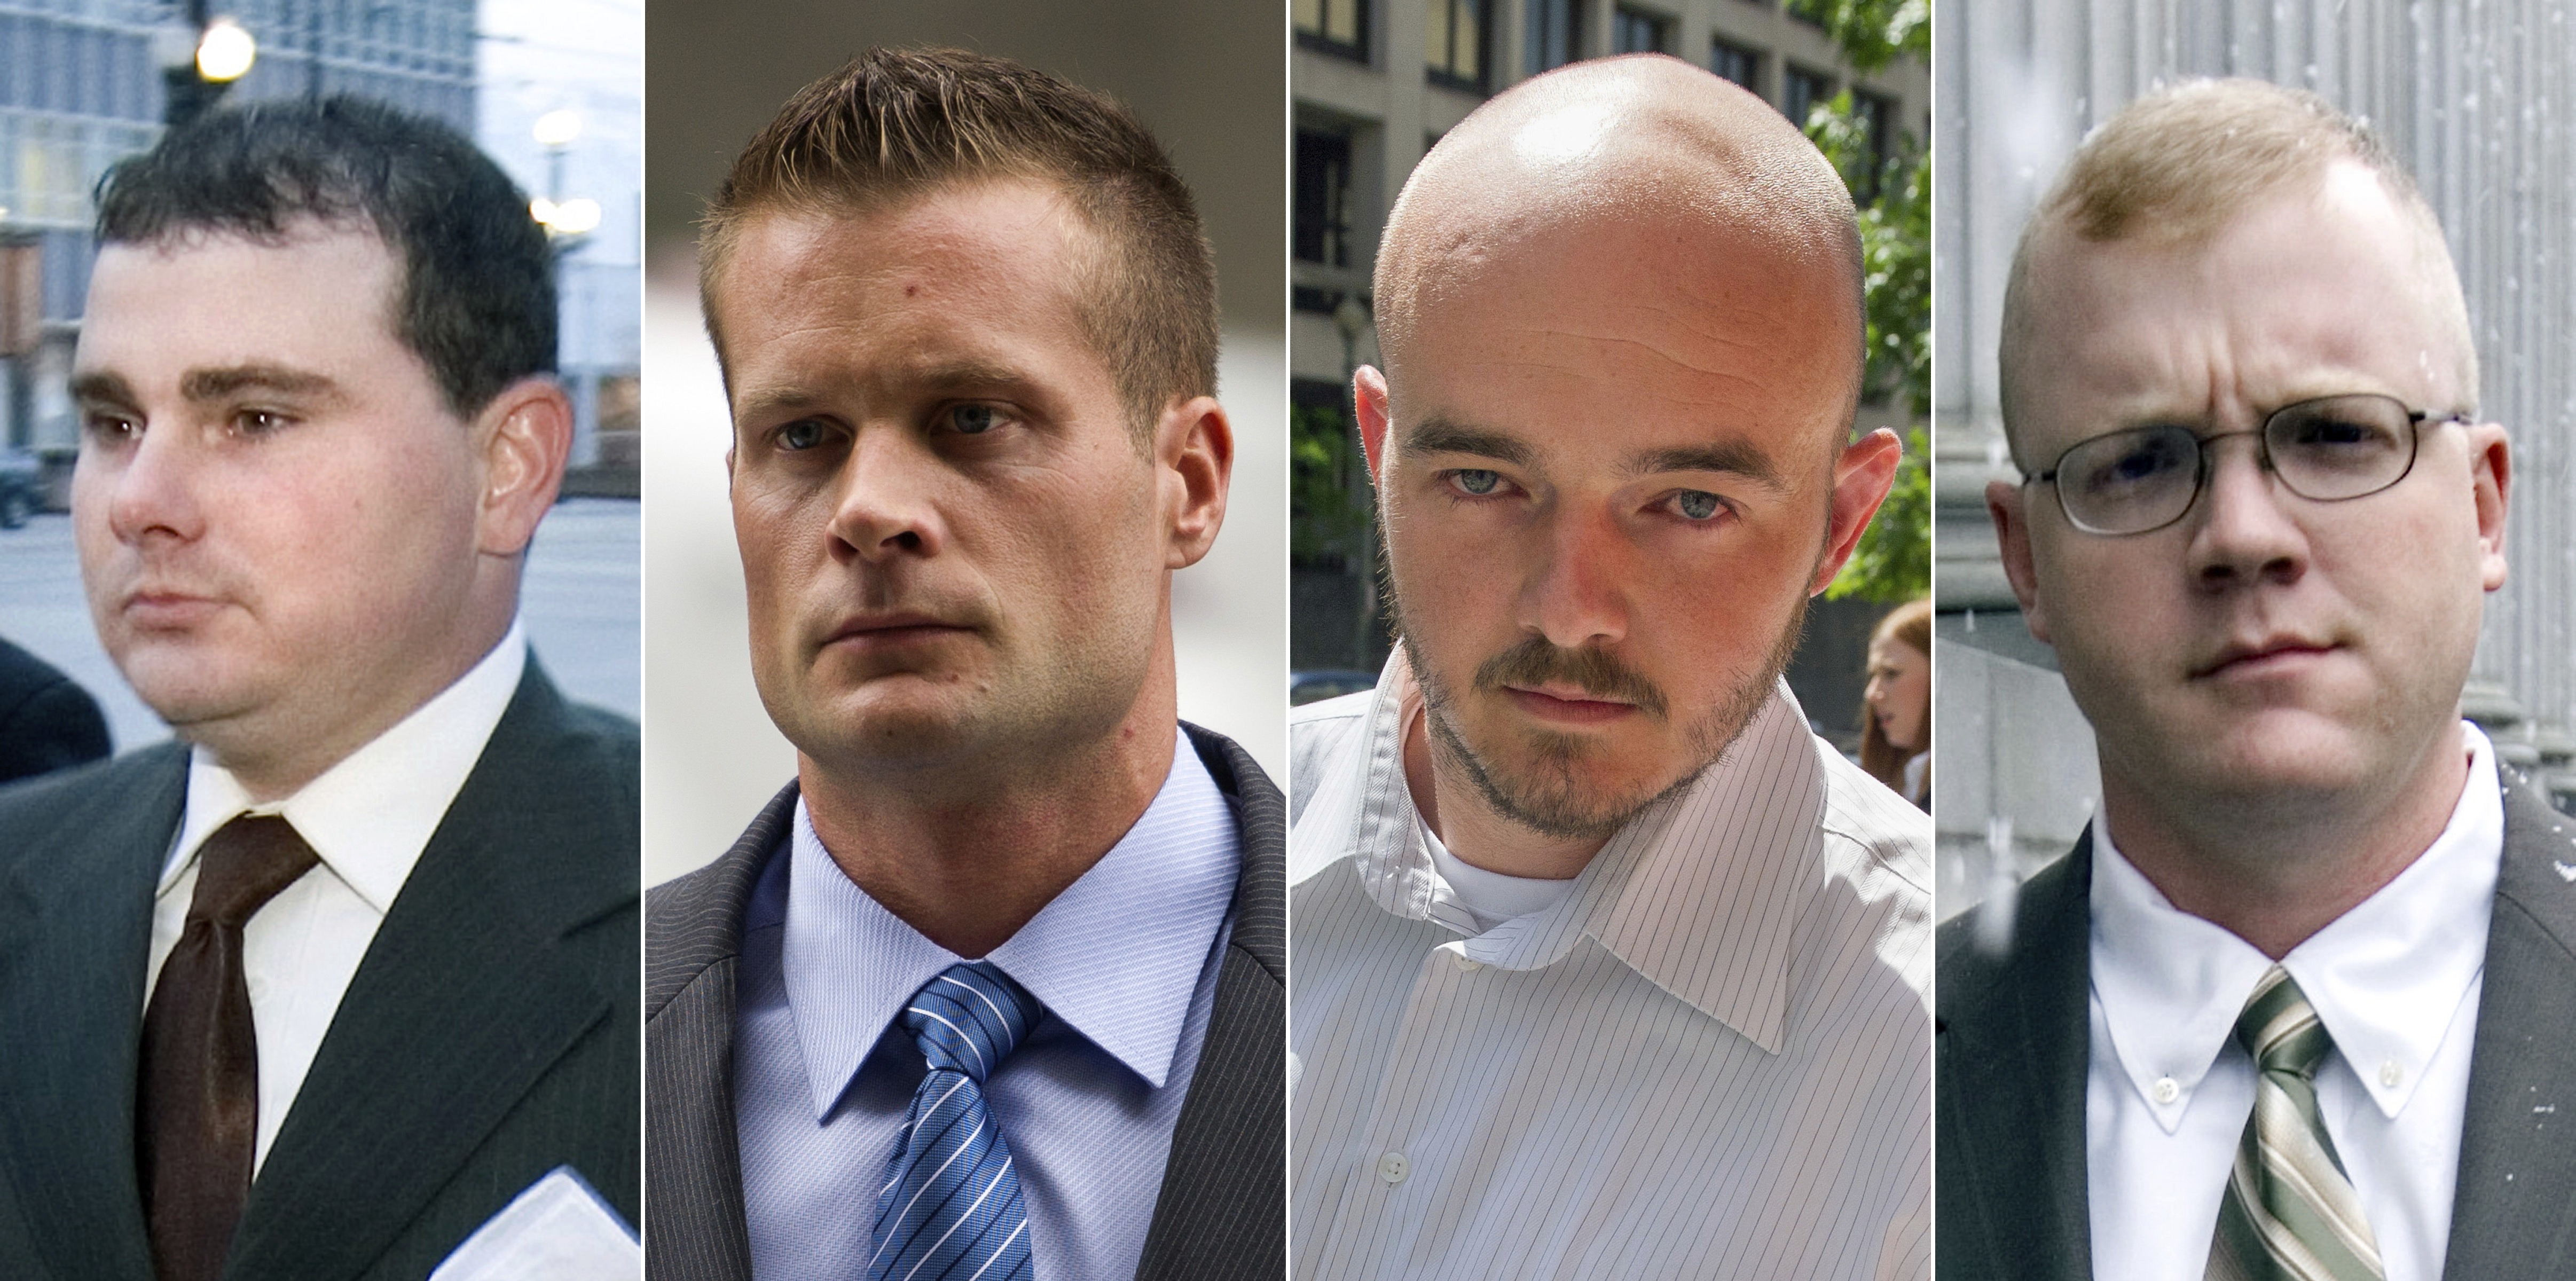 This combination made from file photos shows Blackwater guards, from left, Dustin Heard, Evan Liberty, Nicholas Slatten and Paul Slough. On Tuesday, Dec. 22, 2020, President Donald Trump pardoned 15 people, including Heard, Liberty, Slatten and Slough, the four former government contractors convicted in a 2007 massacre in Baghdad that left more a dozen Iraqi civilians dead. CREDIT: AP